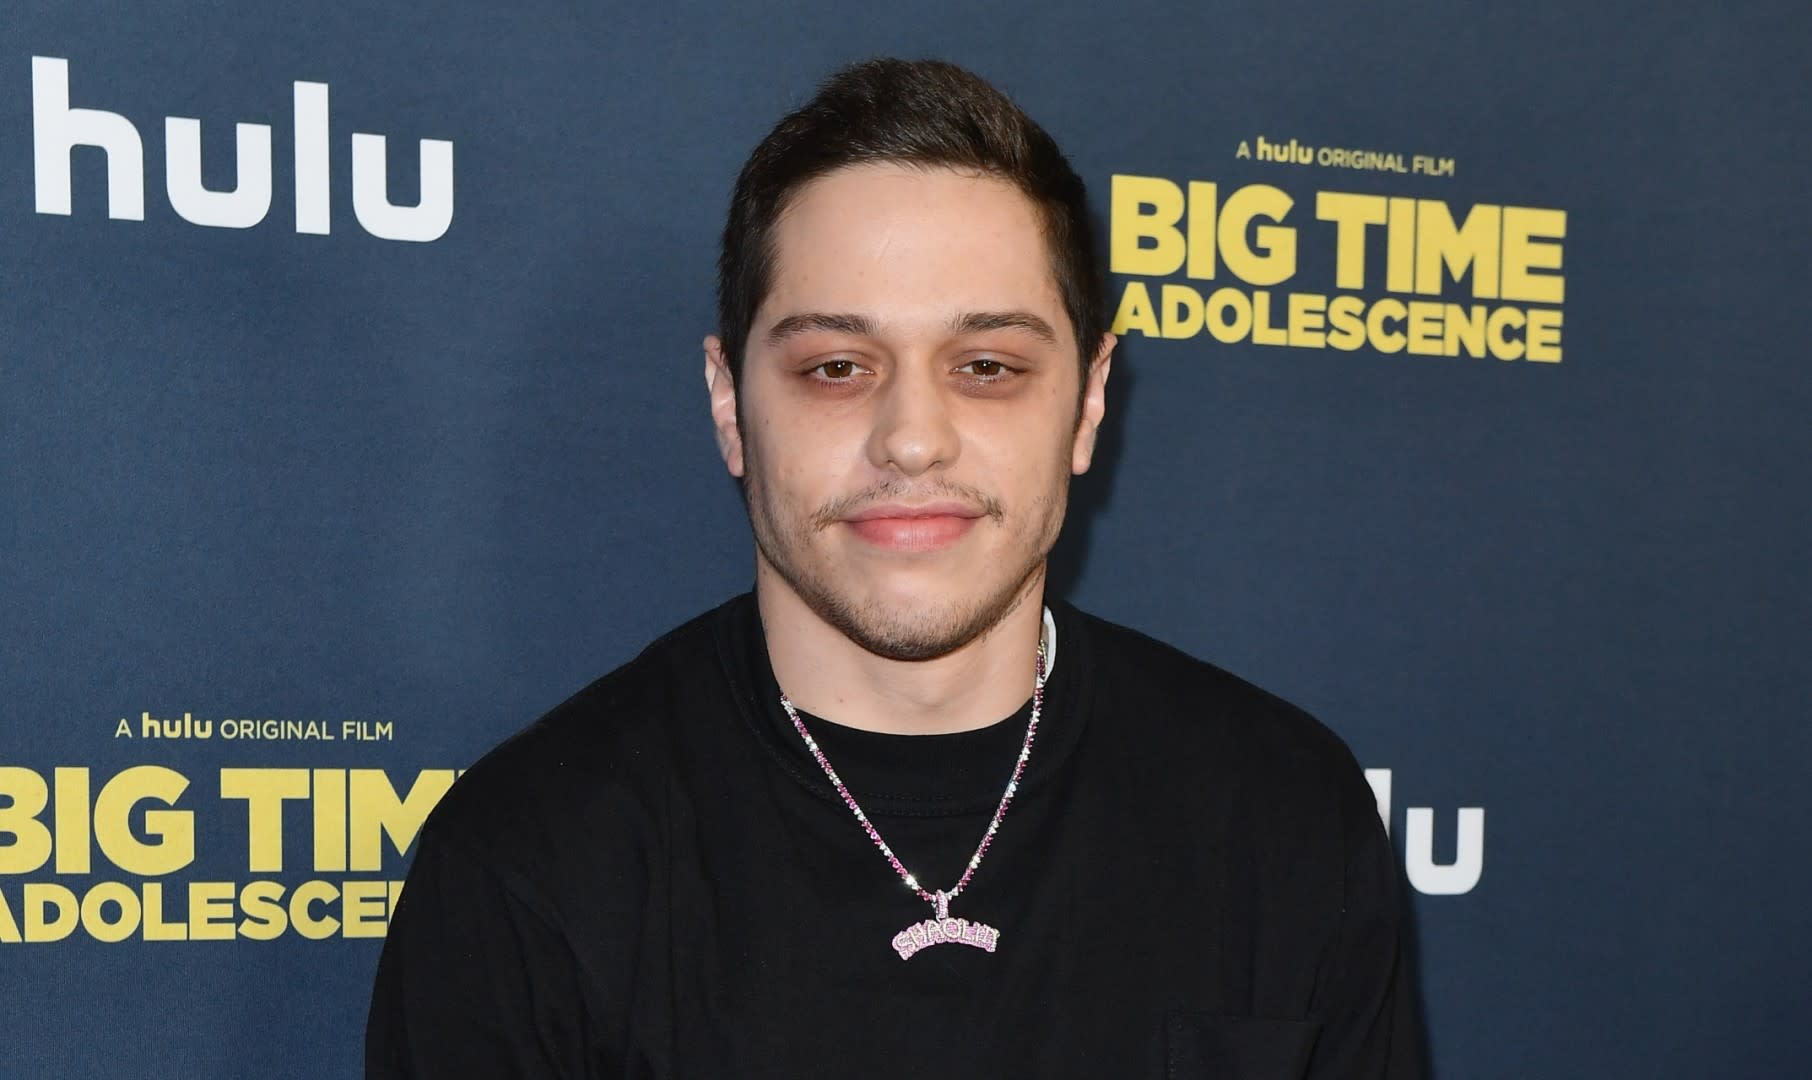 Pete Davidson’s lawyer responds to a ‘Completely fake’ press release alleging that the ‘SNL’ star is married